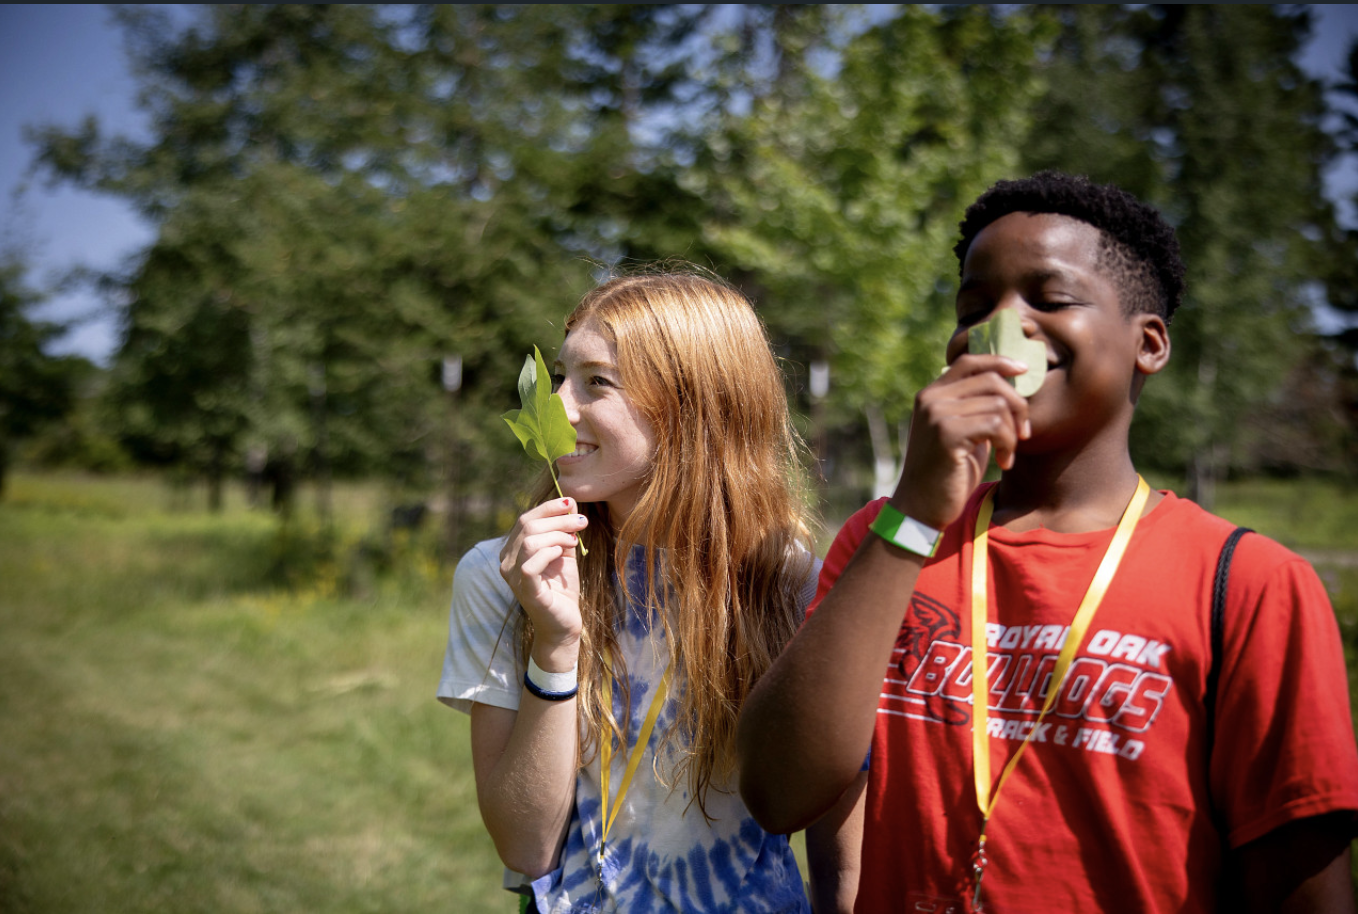 Two young teens smil as they hold leaves up to their faces